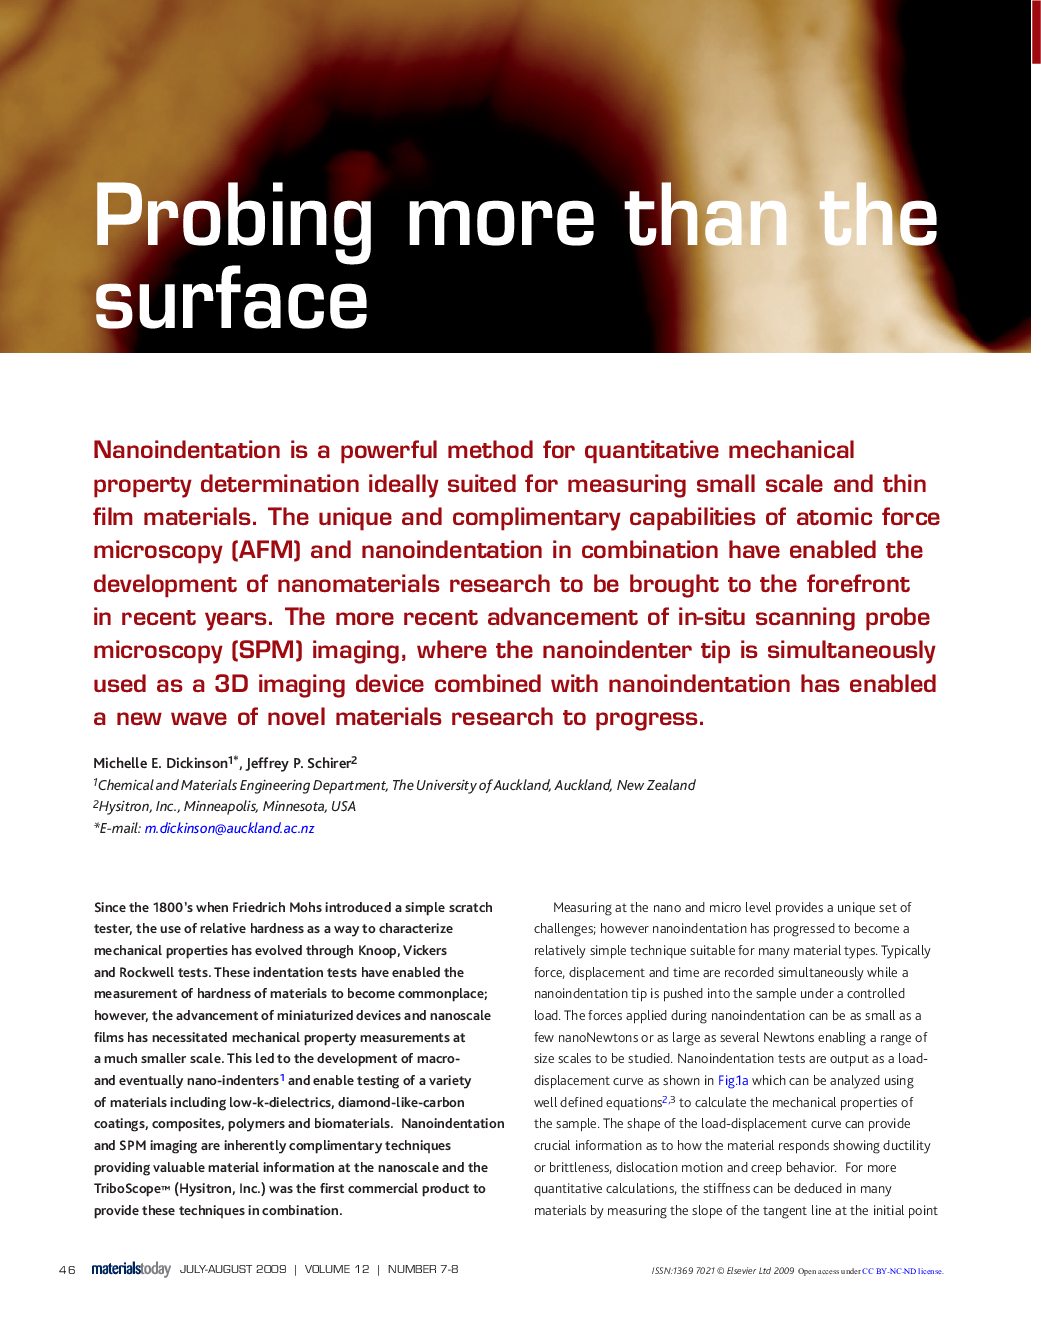 Probing more than the surface